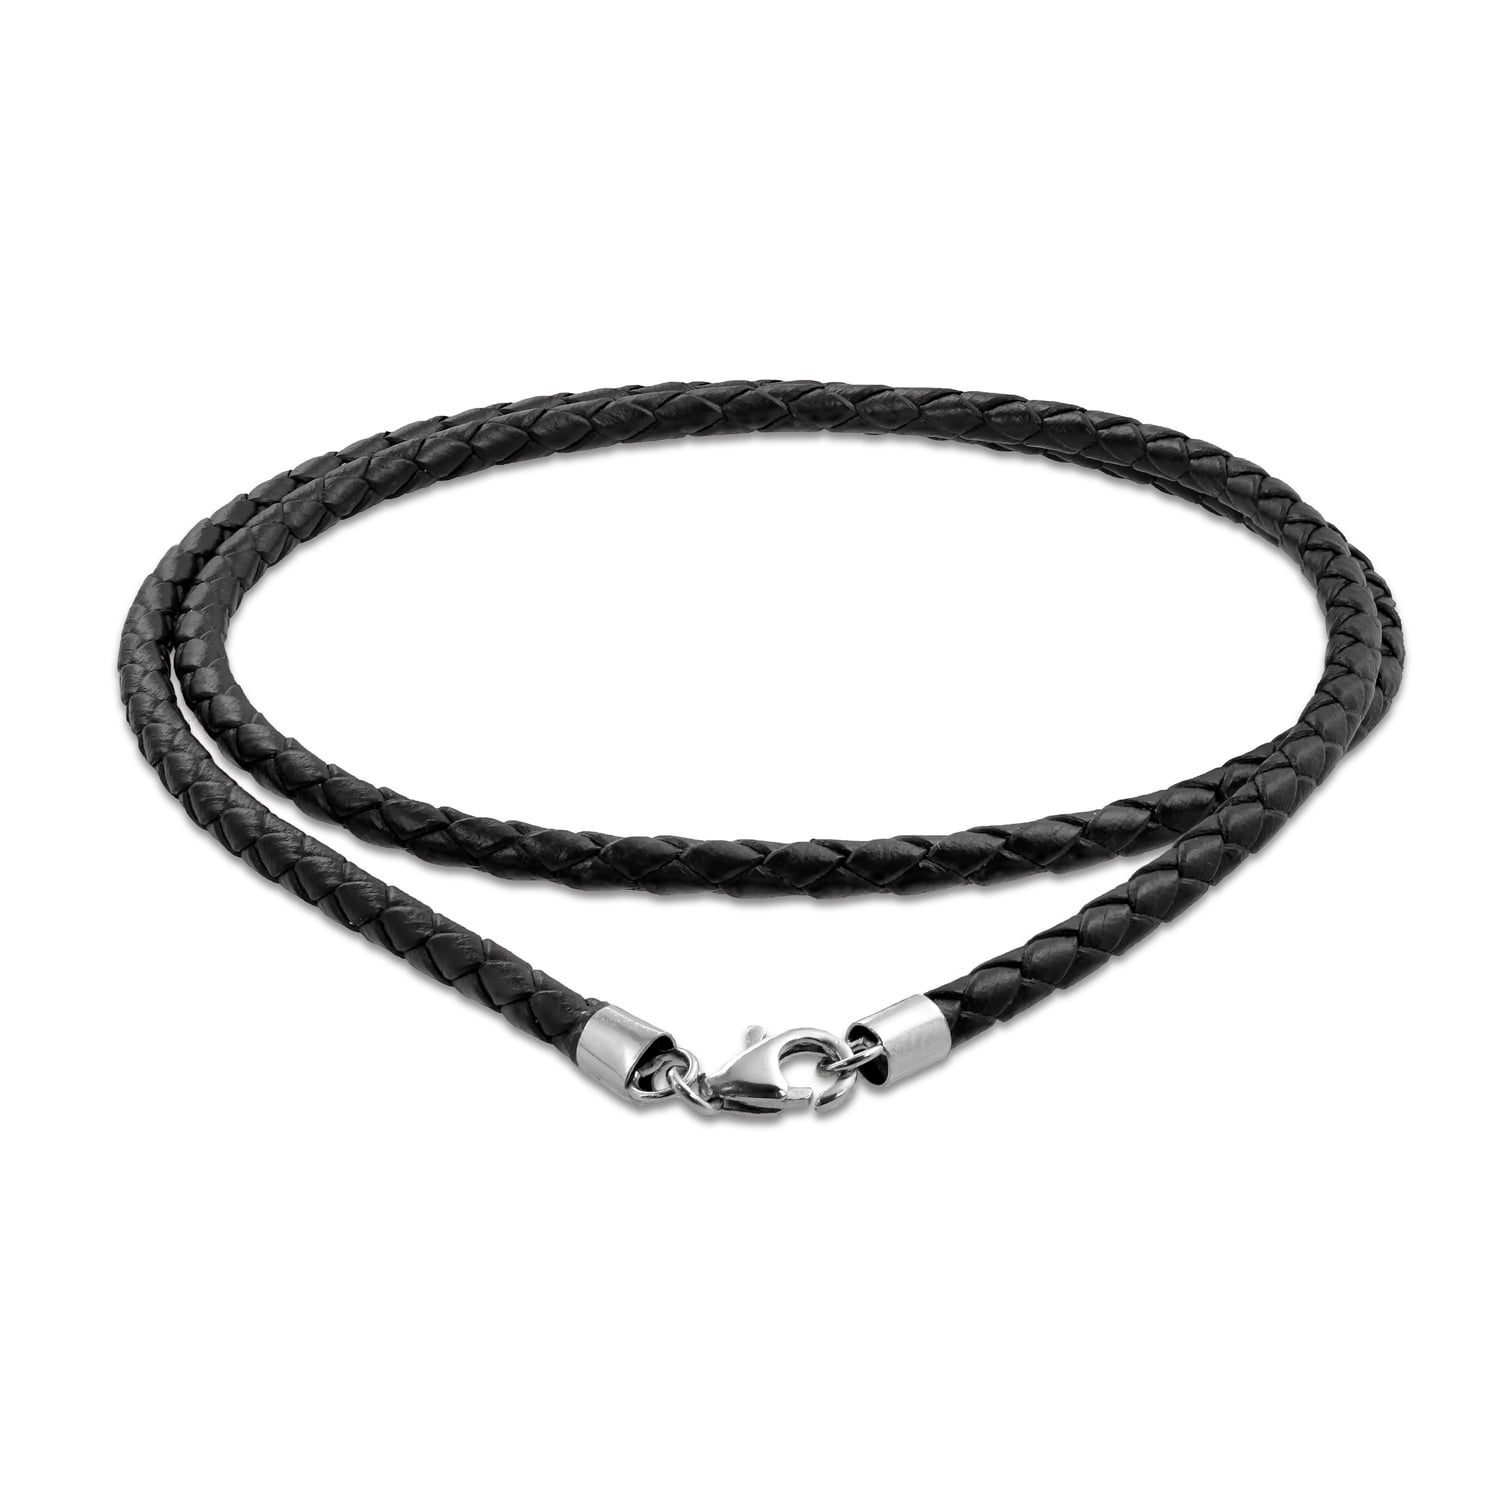 Mens/Ladies Leather Necklace-925 Sterling Silver Clasp-3mm Braided Grey necklace 